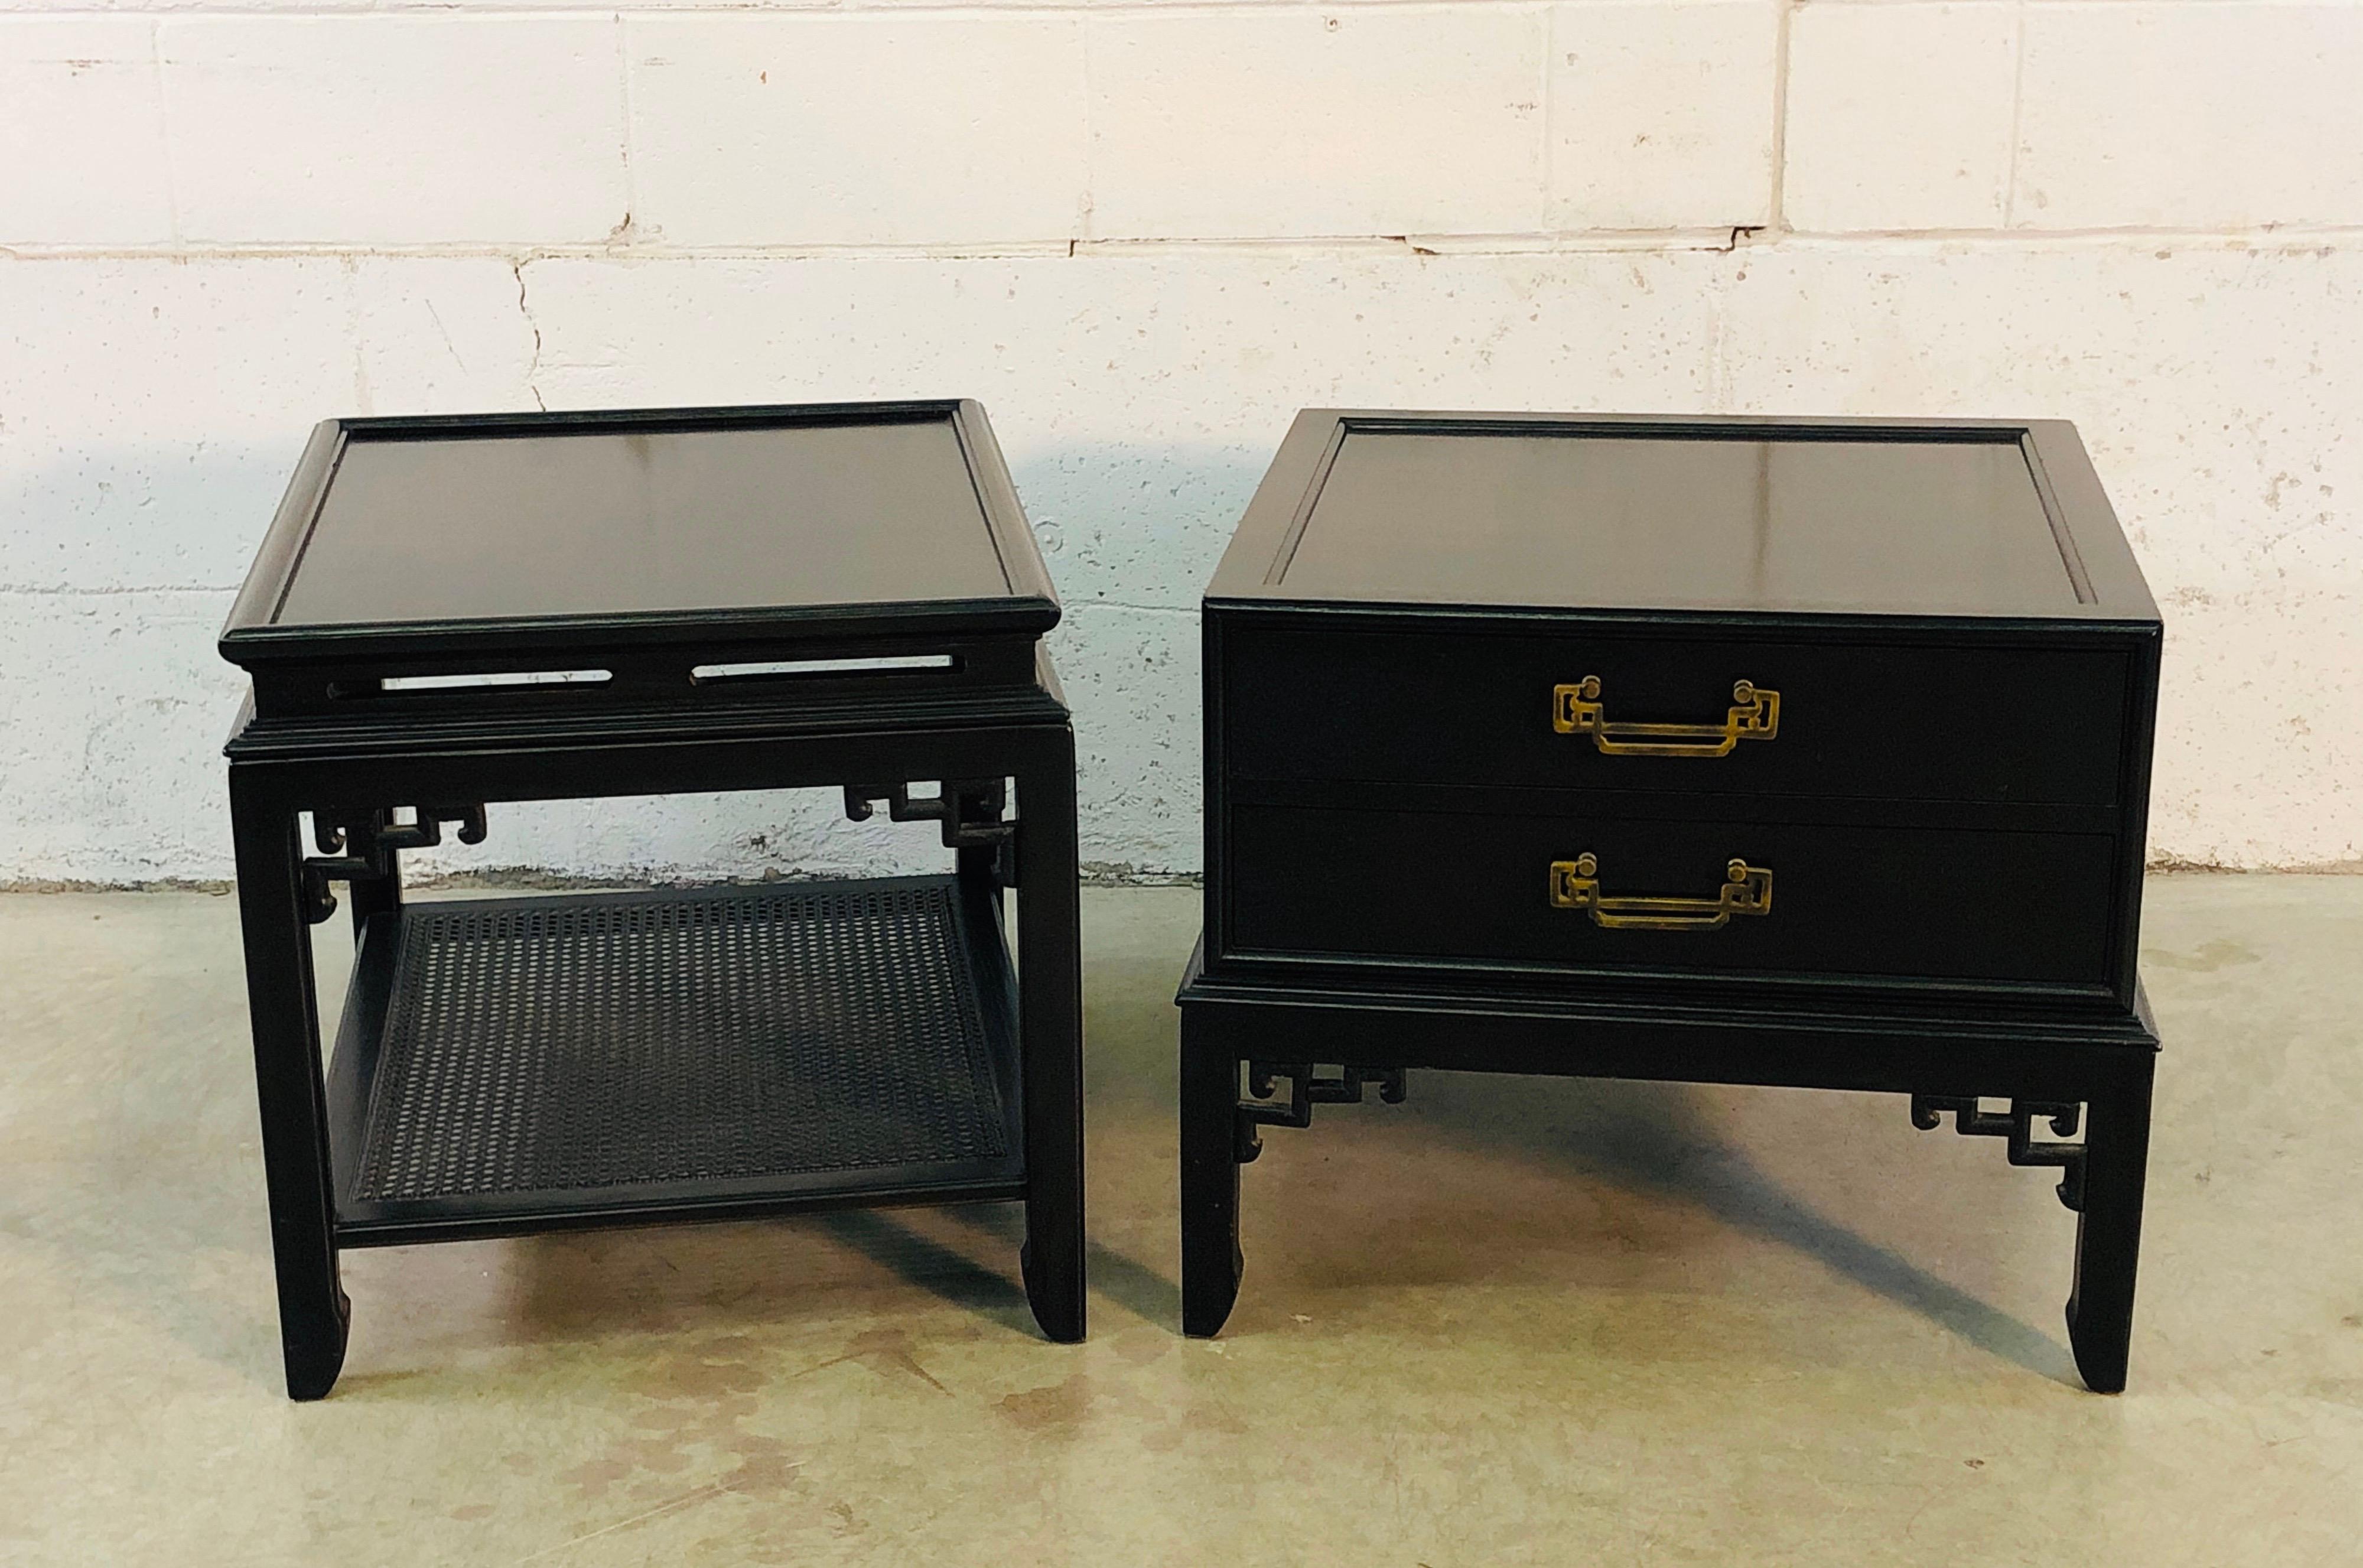 Vintage pair of Hekman Furniture Co black lacquered Asian Modern side tables. One table has two drawers for storage with brass pulls. This table measures 25.5” L x 25.5” W x 21.25” H and is marked in the drawer. This table is square. The other side